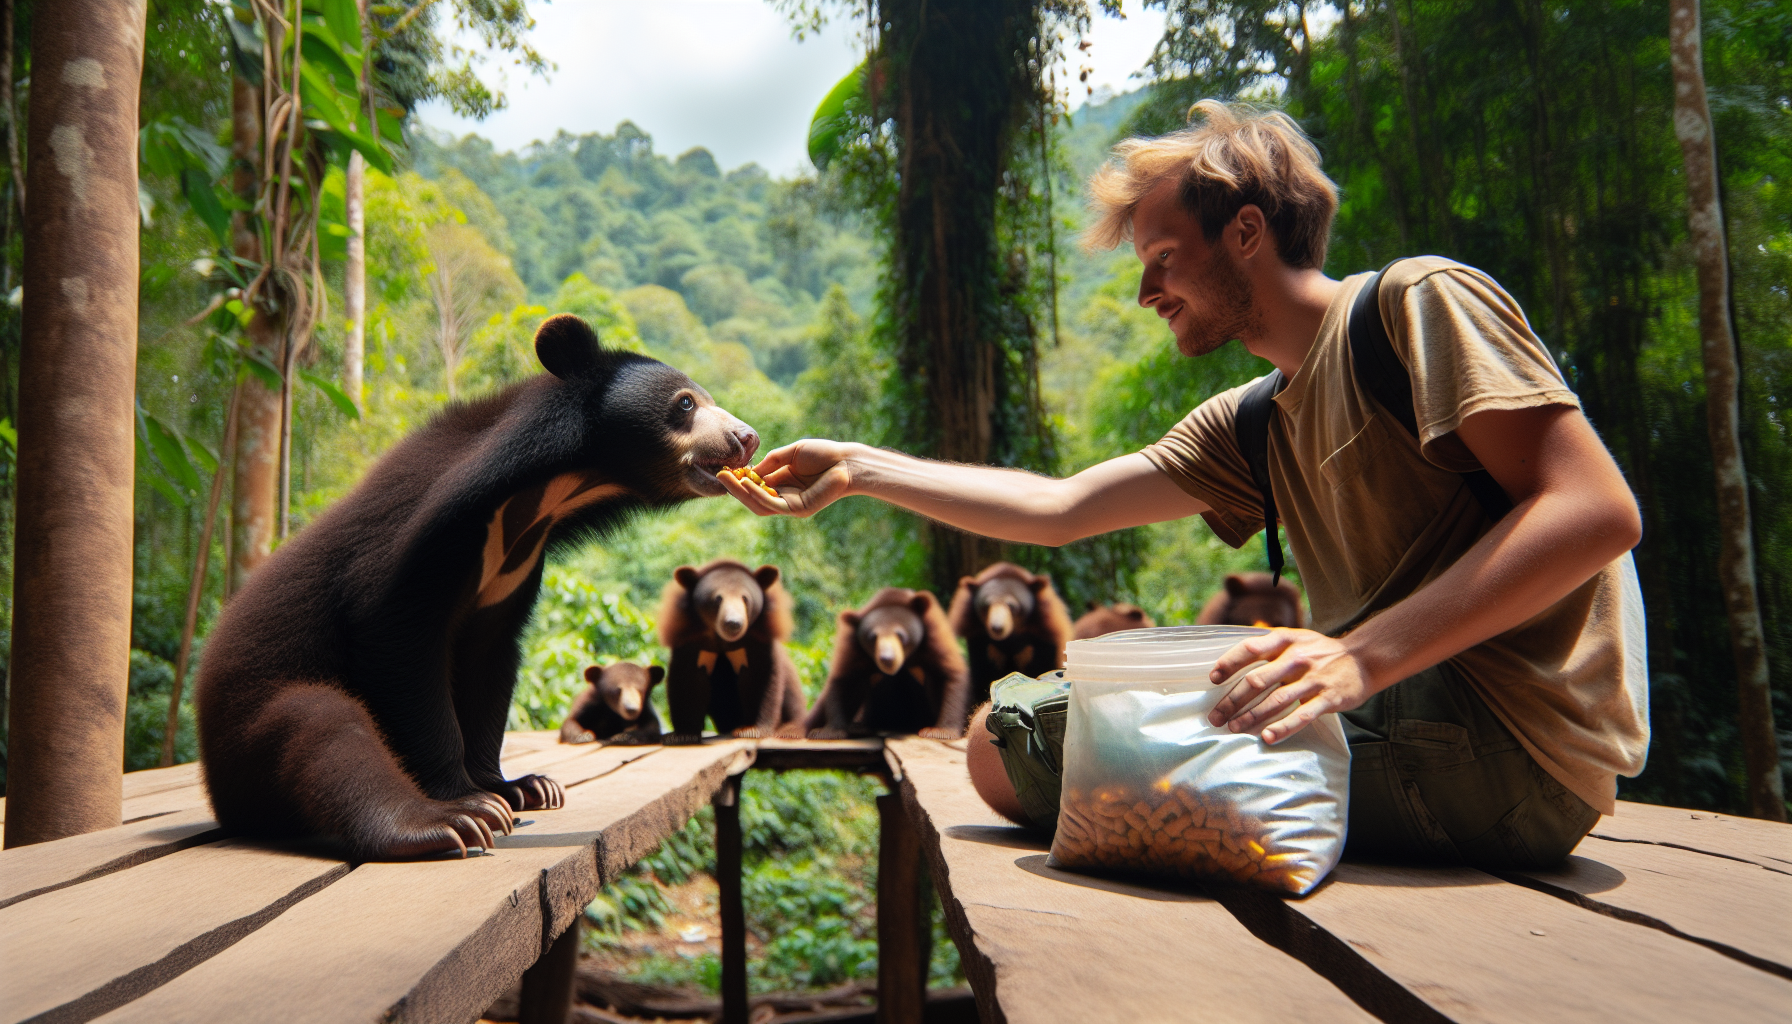 Ethical wildlife encounter at Kuang Si Bear Rescue Centre in Laos